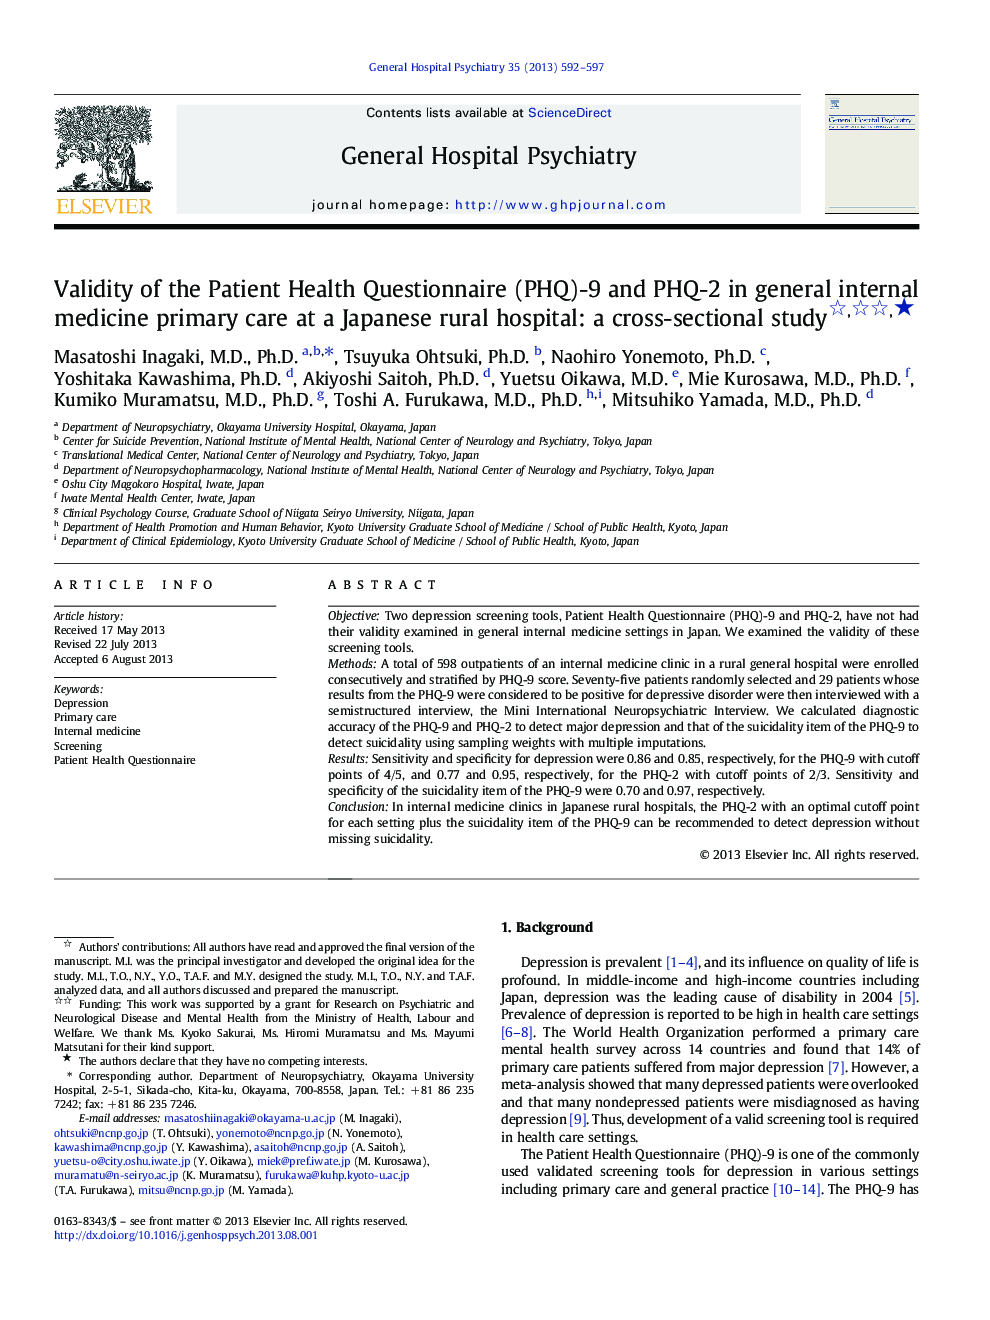 Validity of the Patient Health Questionnaire (PHQ)-9 and PHQ-2 in general internal medicine primary care at a Japanese rural hospital: a cross-sectional study ★